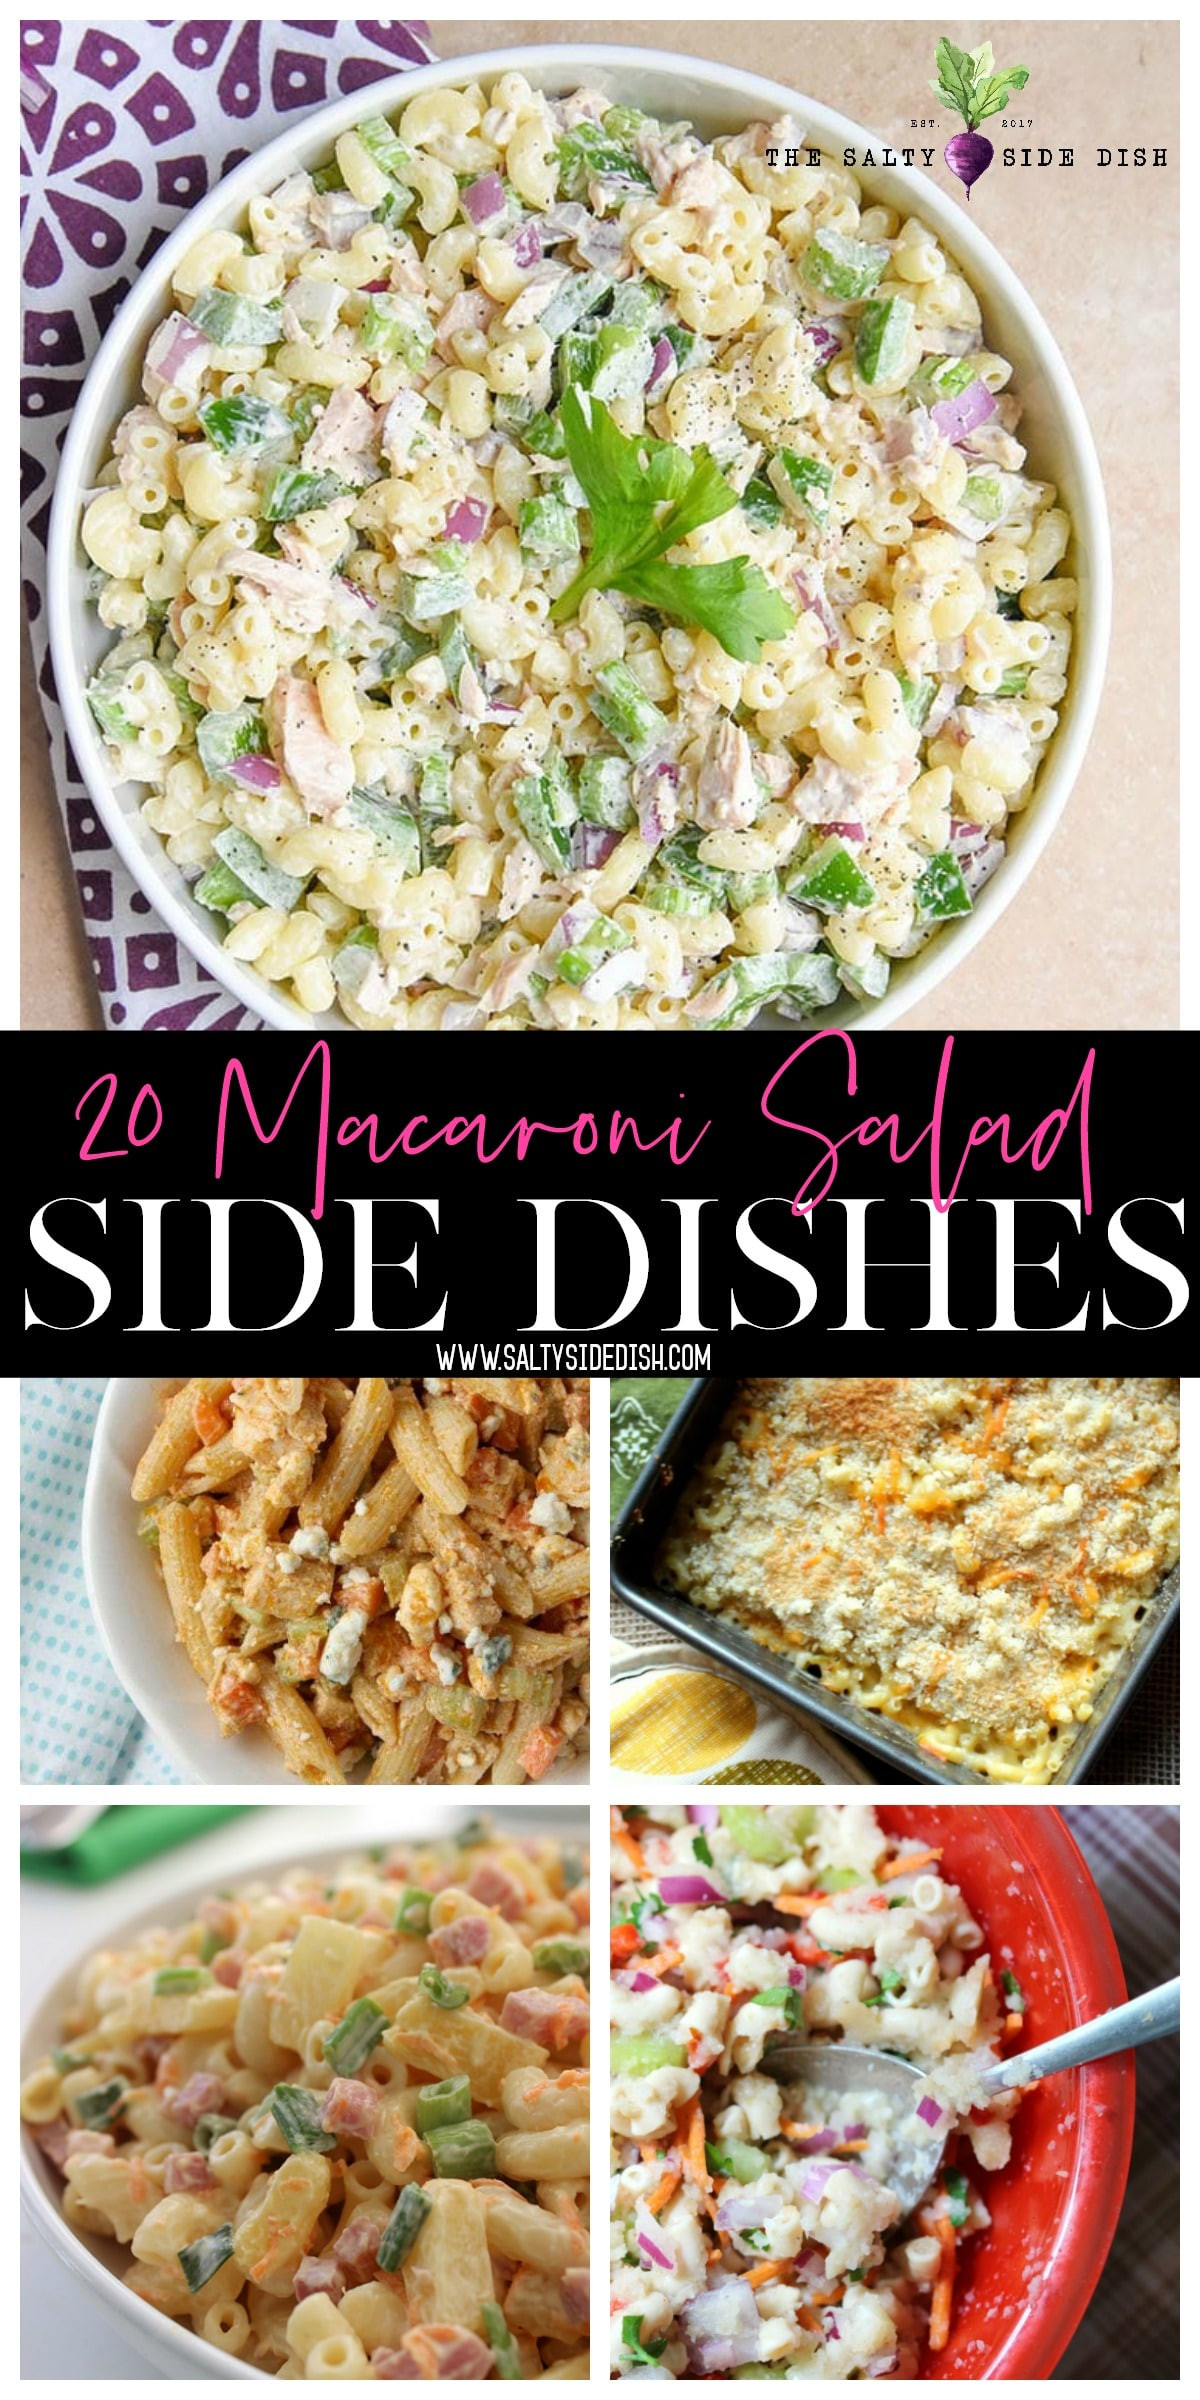 Macaroni Side Dishes
 20 Macaroni Salad Recipes perfect for Summer Sides